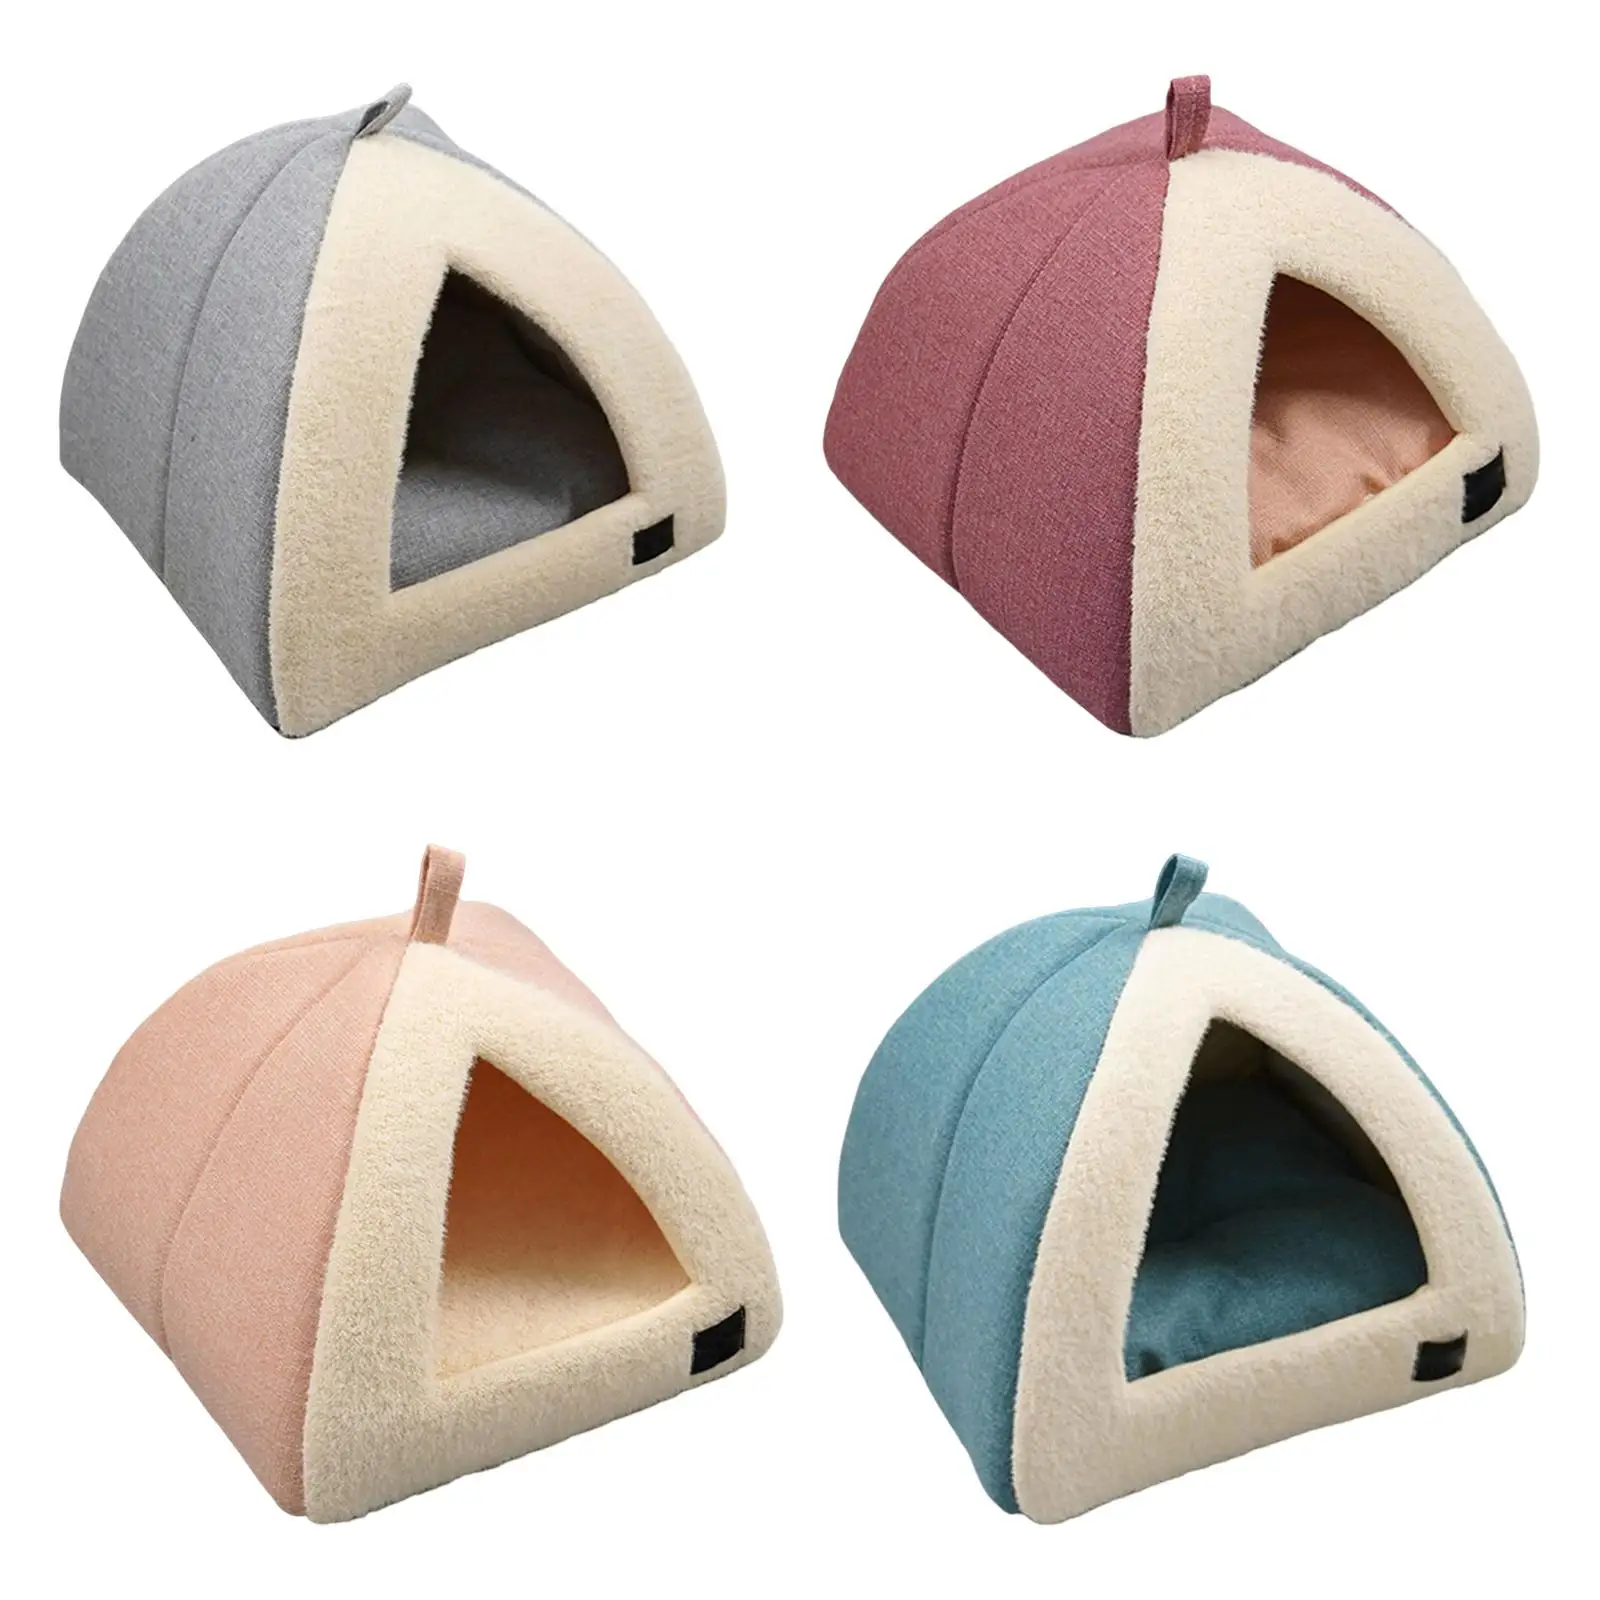 Cat House with Pad Pet Tent Nonslip Kennel Cave Bed for Small Animals Kitten